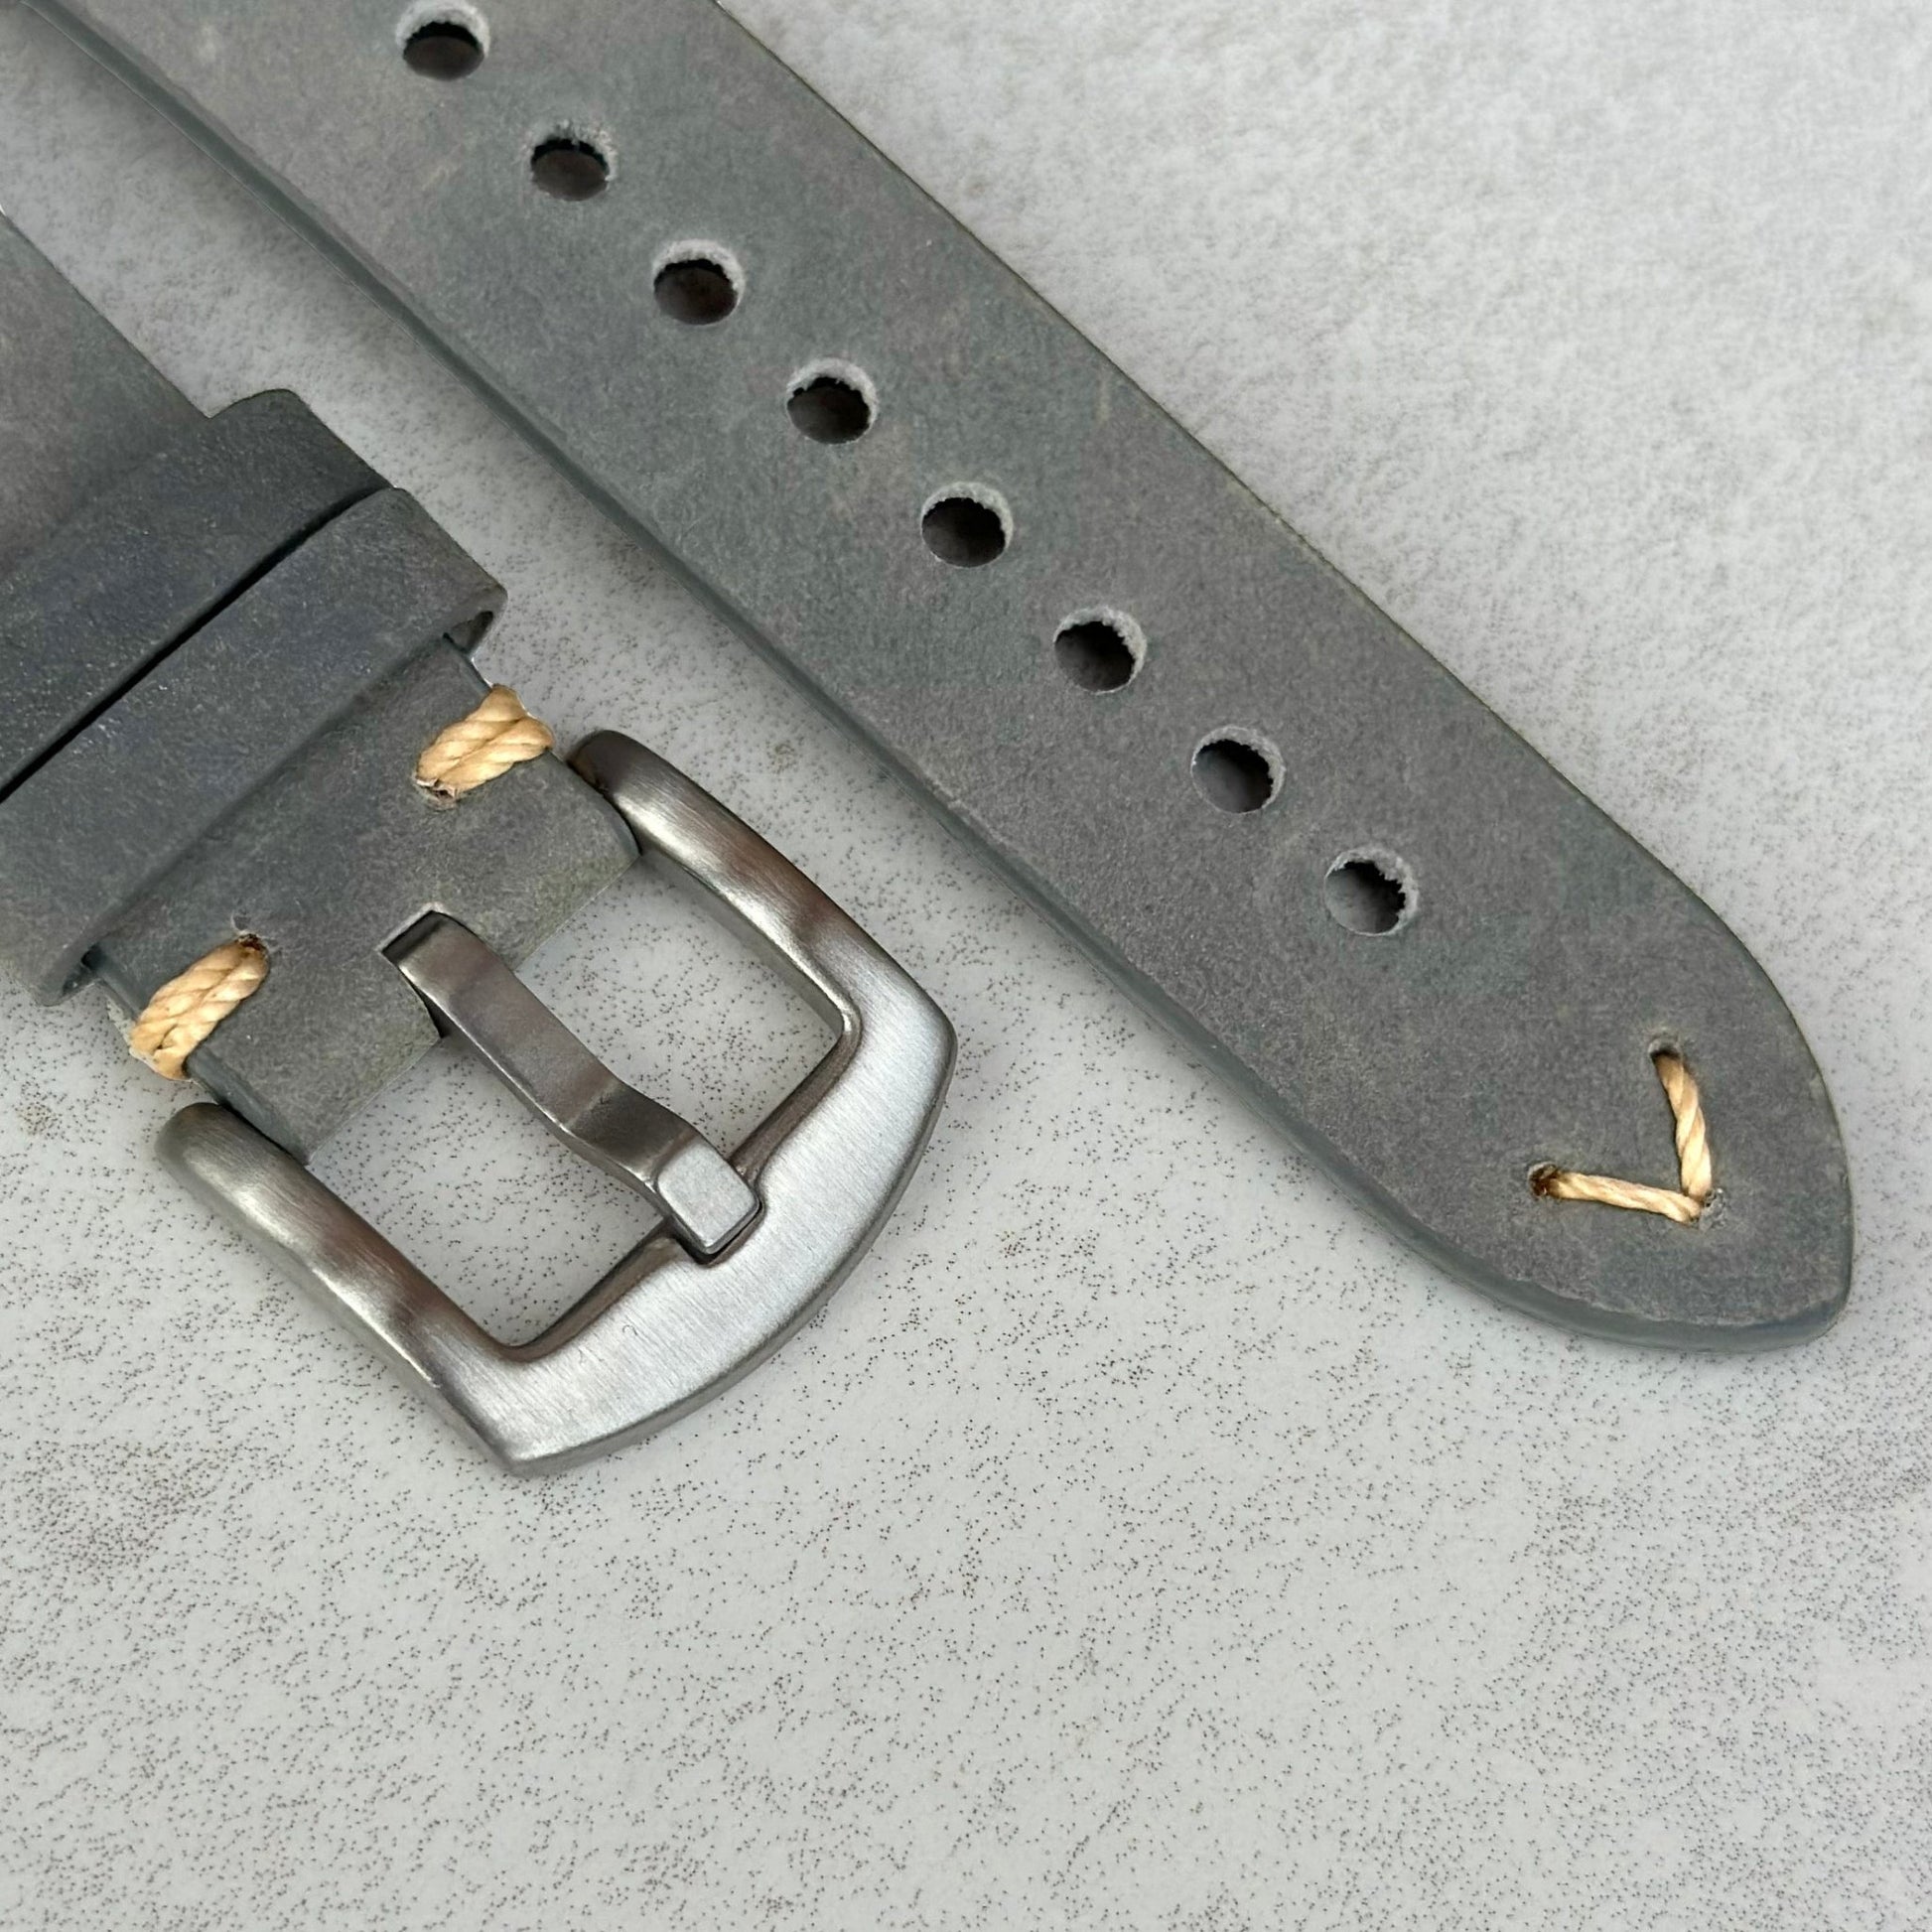 Brushed 316L stainless steel buckle on the Madrid grey horse leather Apple Watch strap. Watch And Strap.